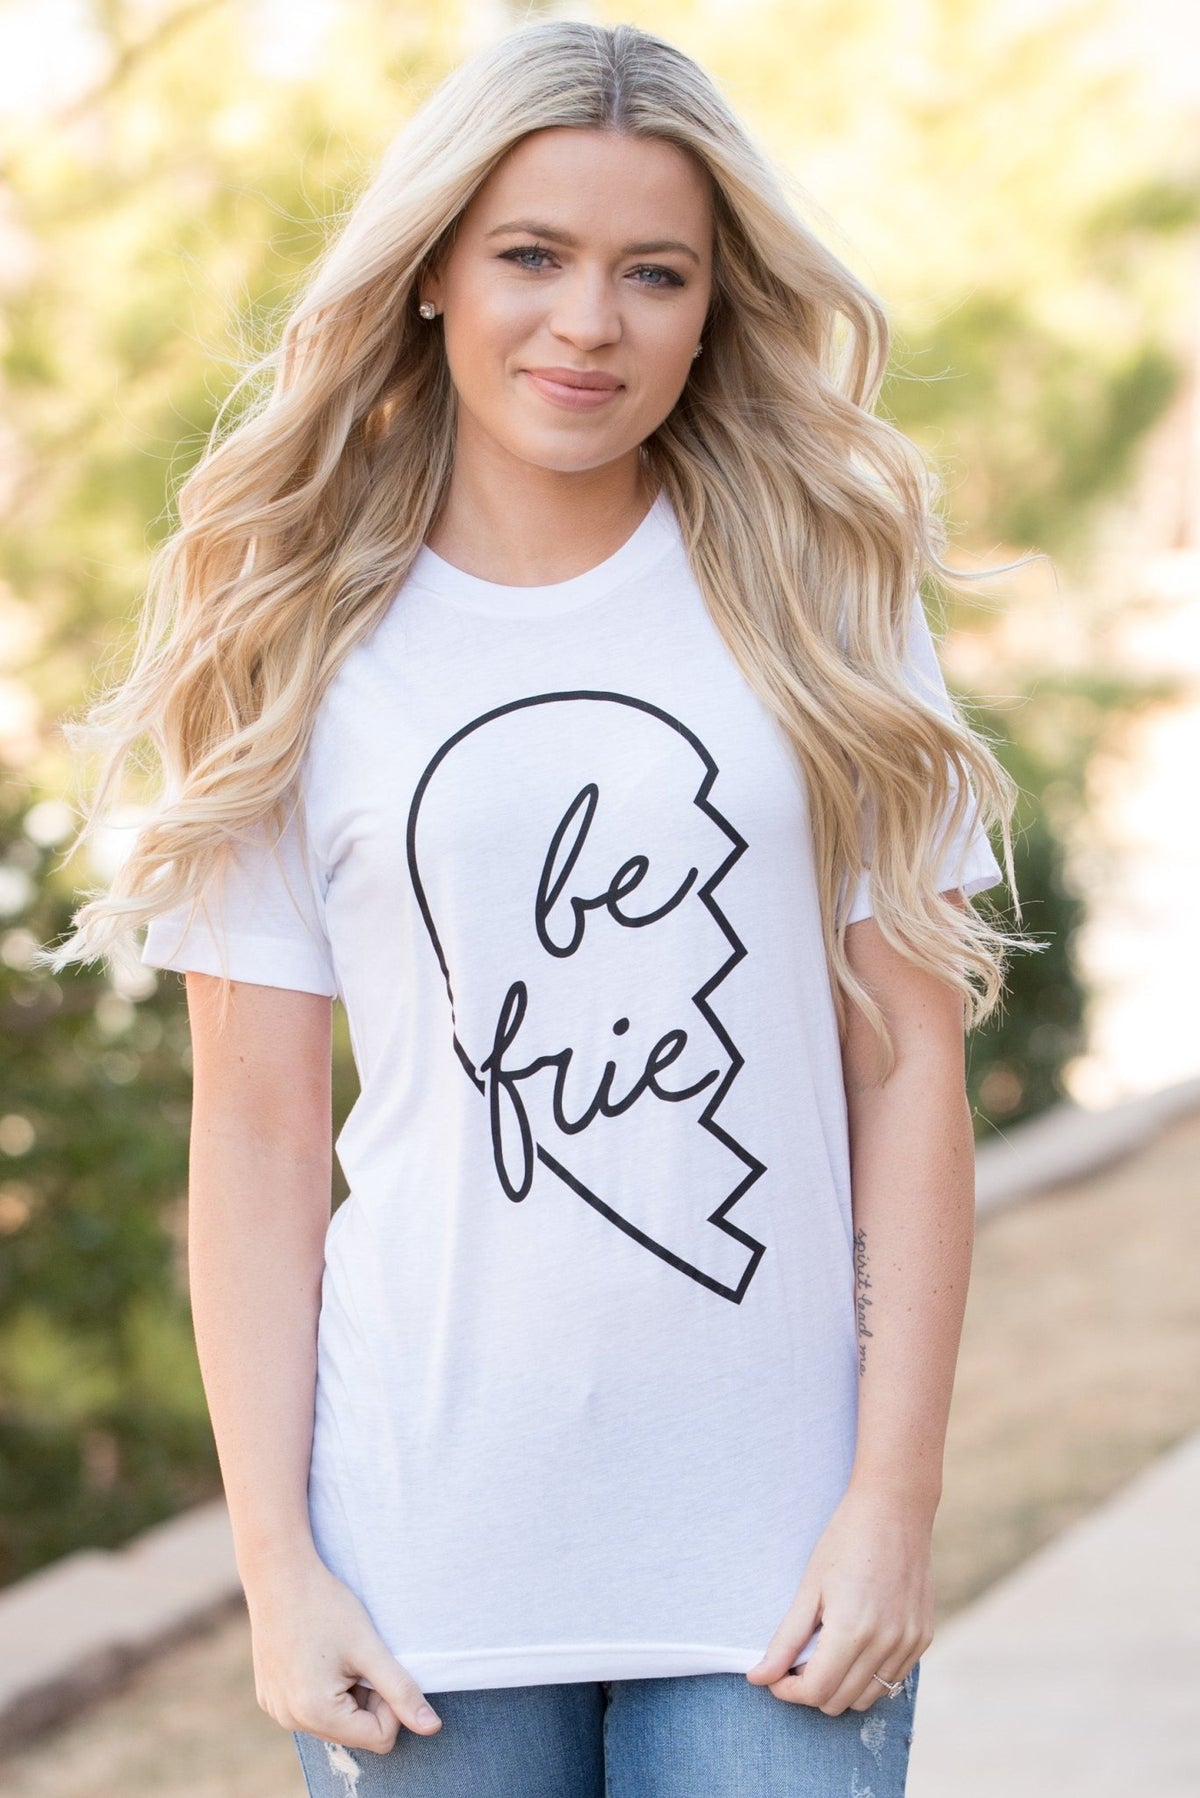 LEFT side best friends t-shirt white - Stylish T-shirts - Trendy Graphic T-Shirts and Tank Tops at Lush Fashion Lounge Boutique in Oklahoma City